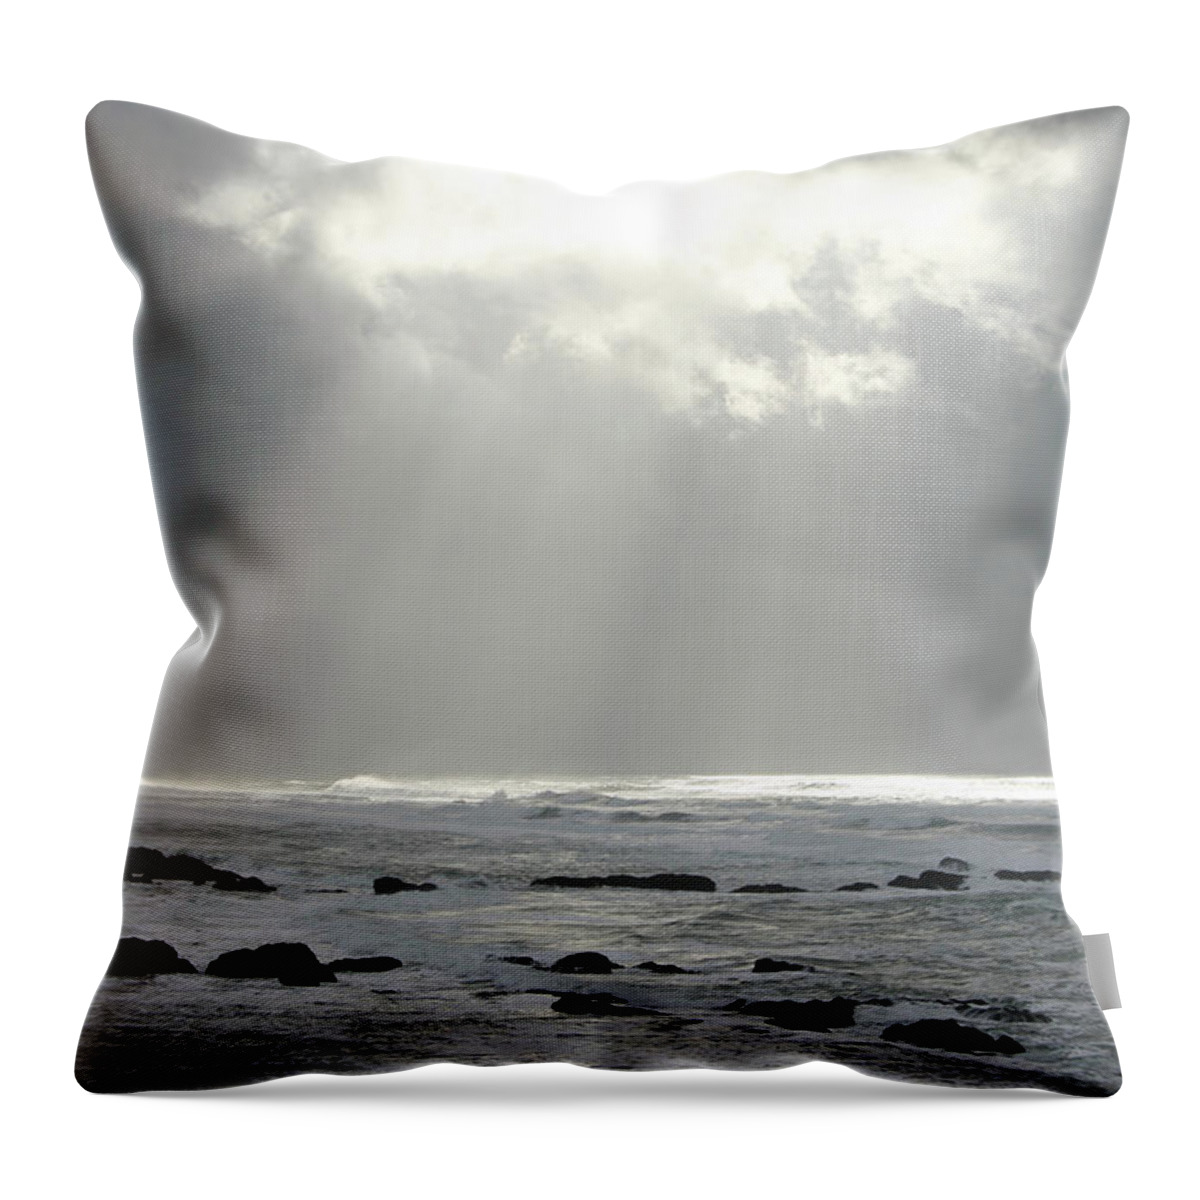 Water's Edge Throw Pillow featuring the photograph Break In The Clouds by Ranplett